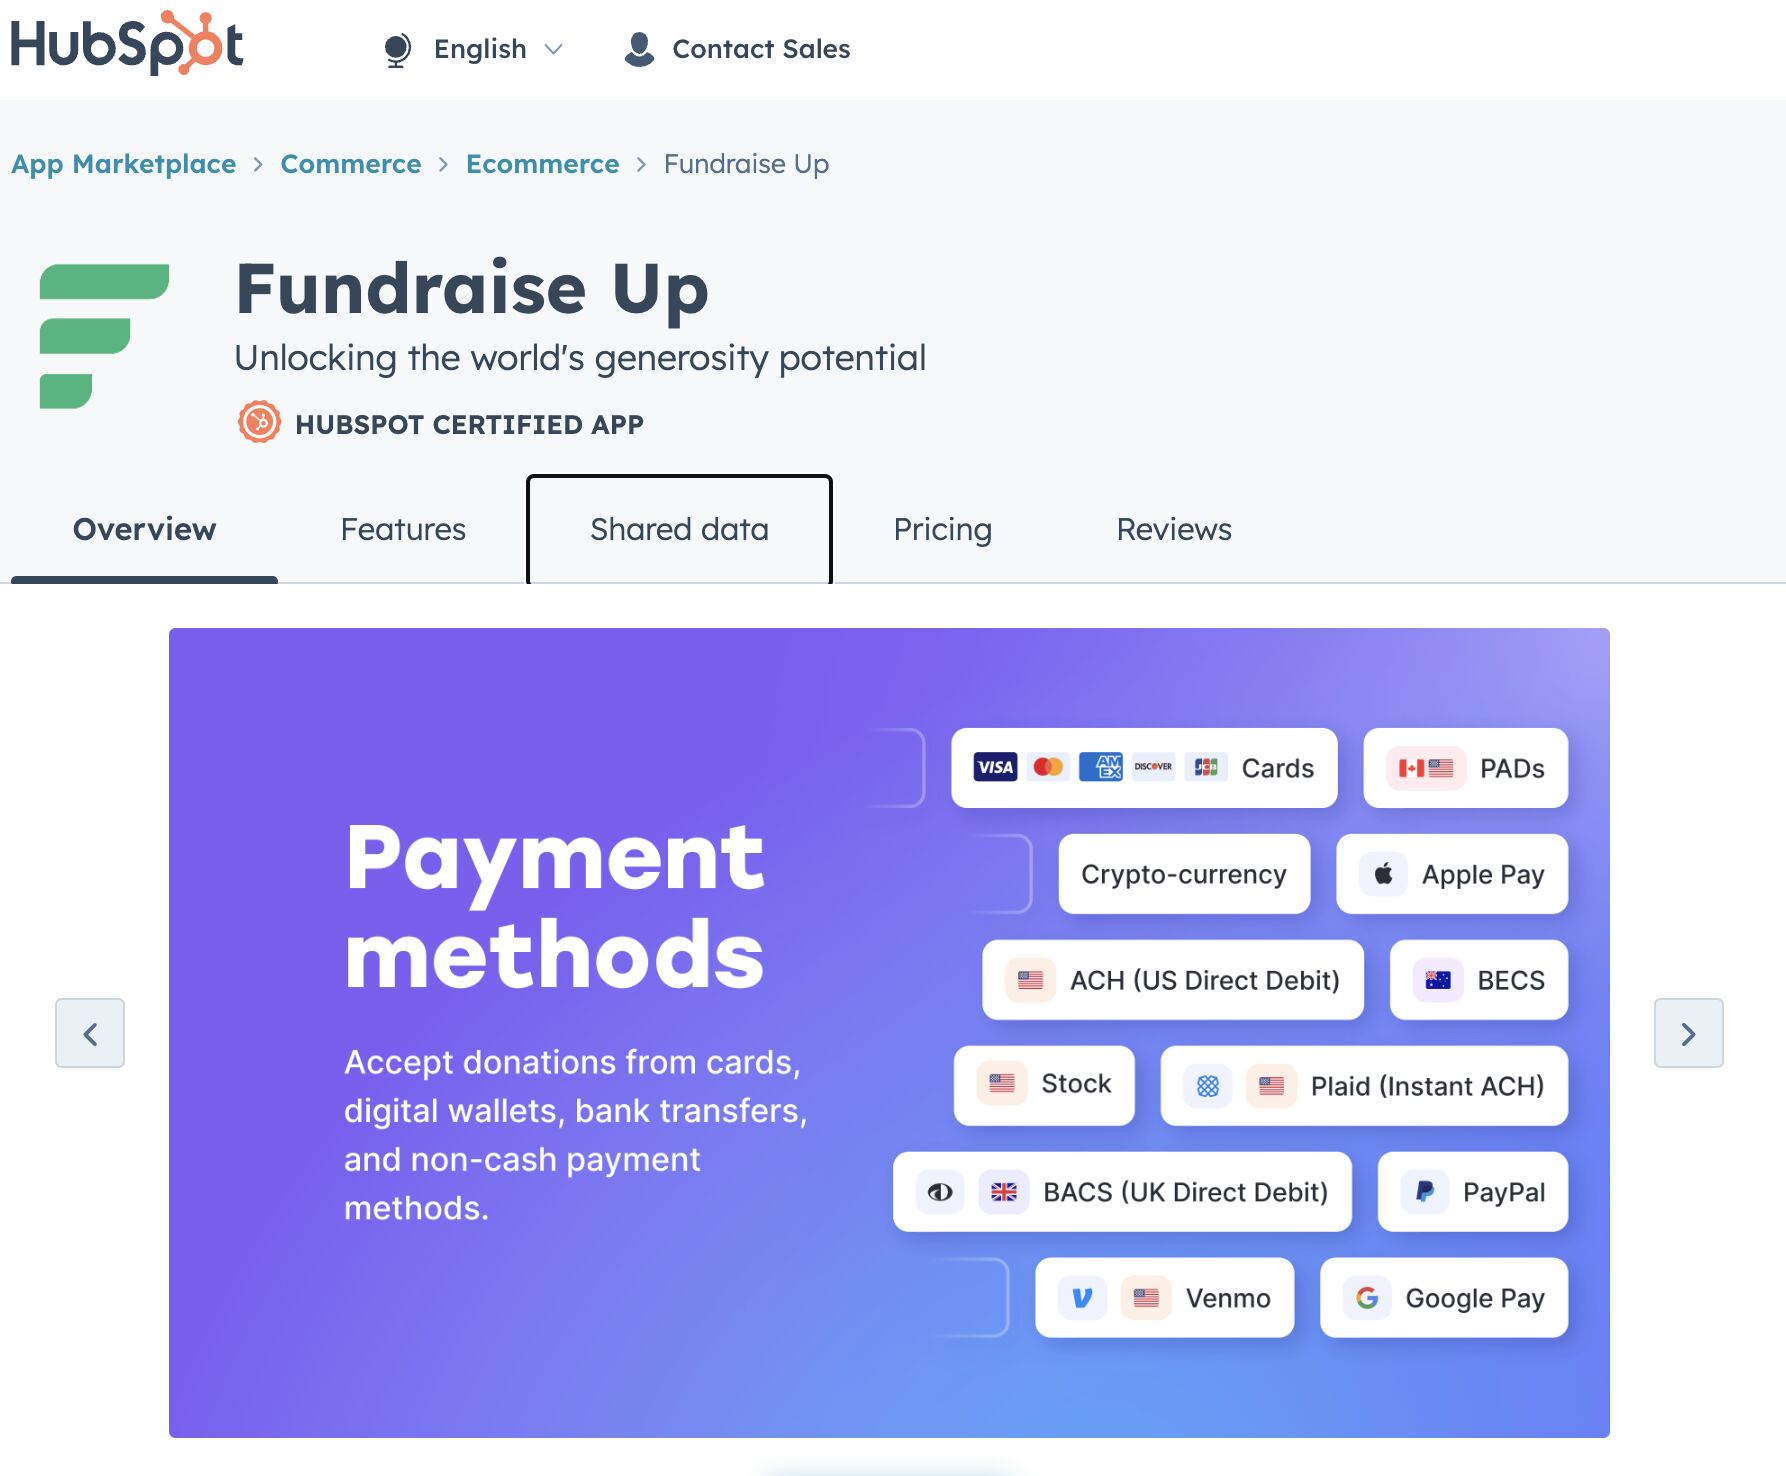 HubSpot and Fundraise Up integration.